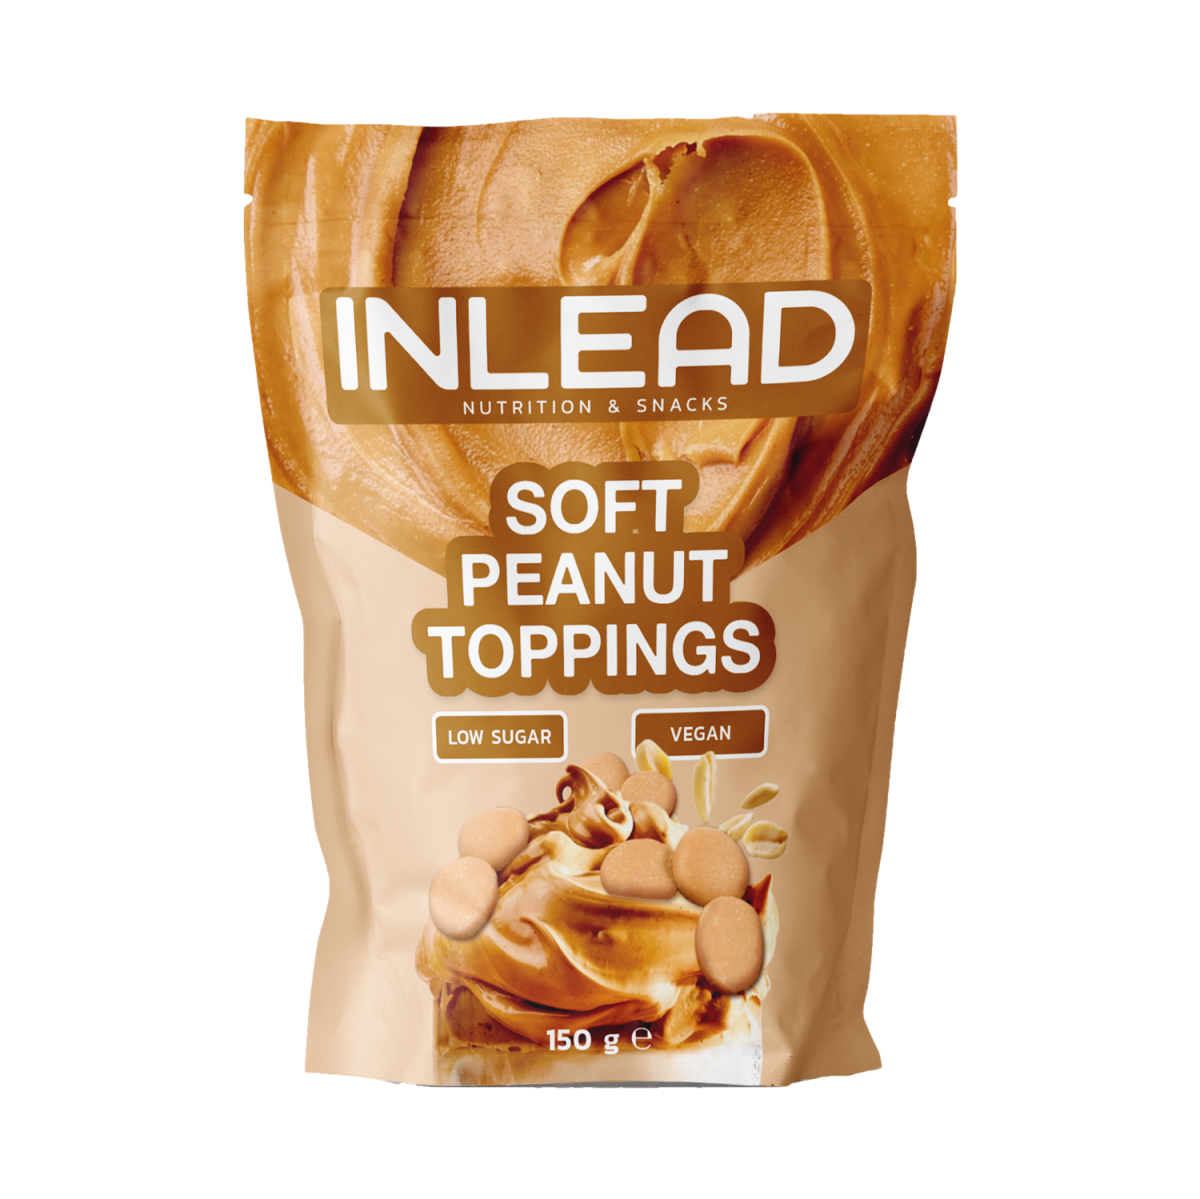 Inlead Soft Peanut Toppings - 150g